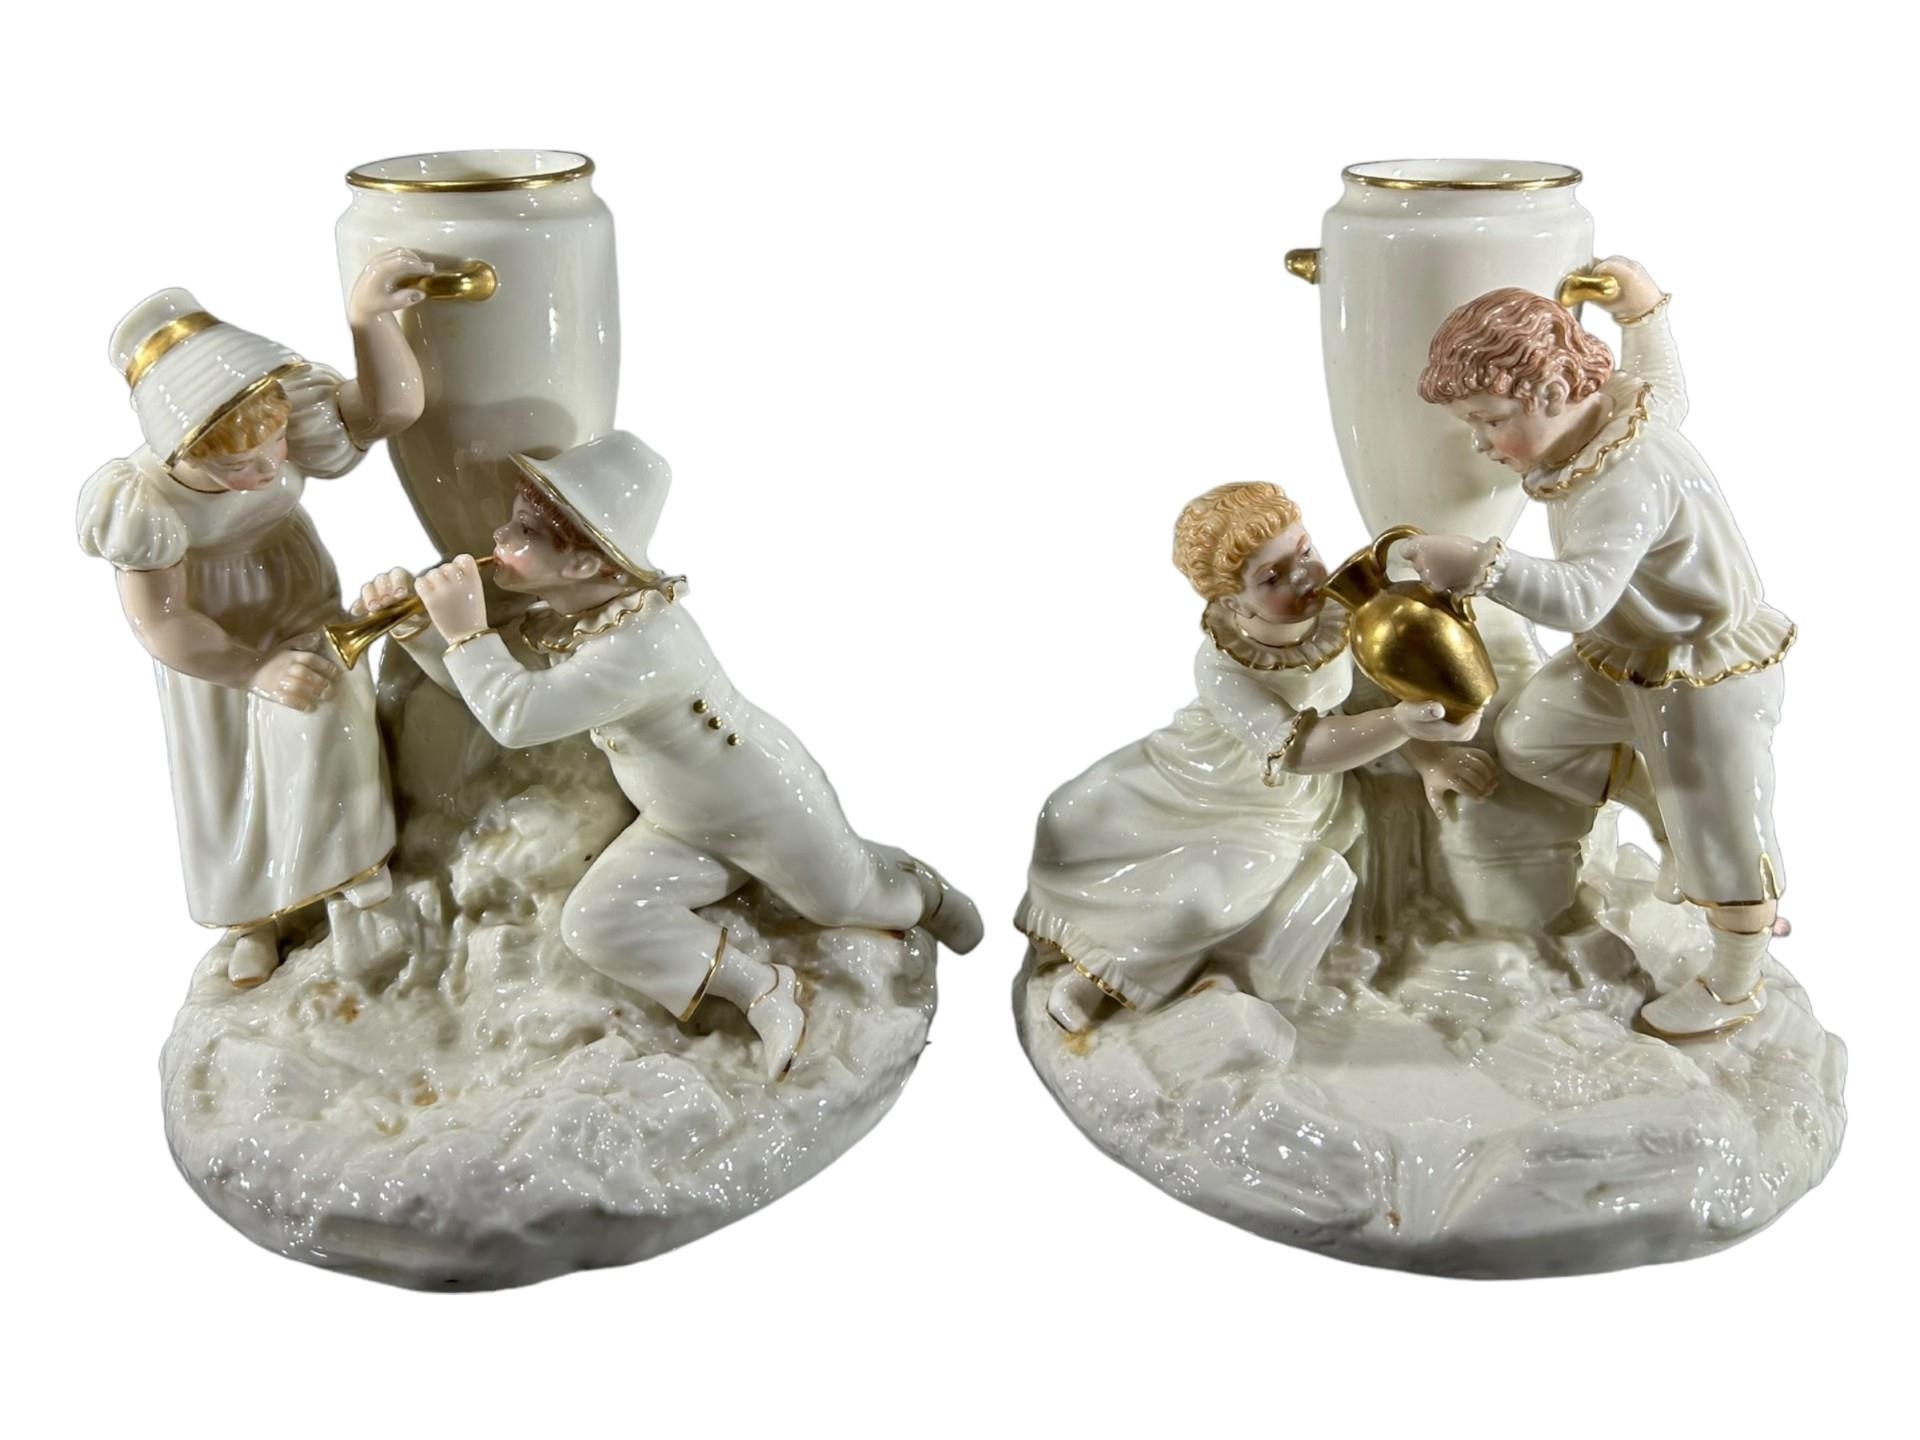 ROYAL WORCESTER, JAMES HADLEY, 19TH CENTURY PORCELAIN FIGURE OF A GIRL, AFTER KATE GREENAWAY, - Image 5 of 7